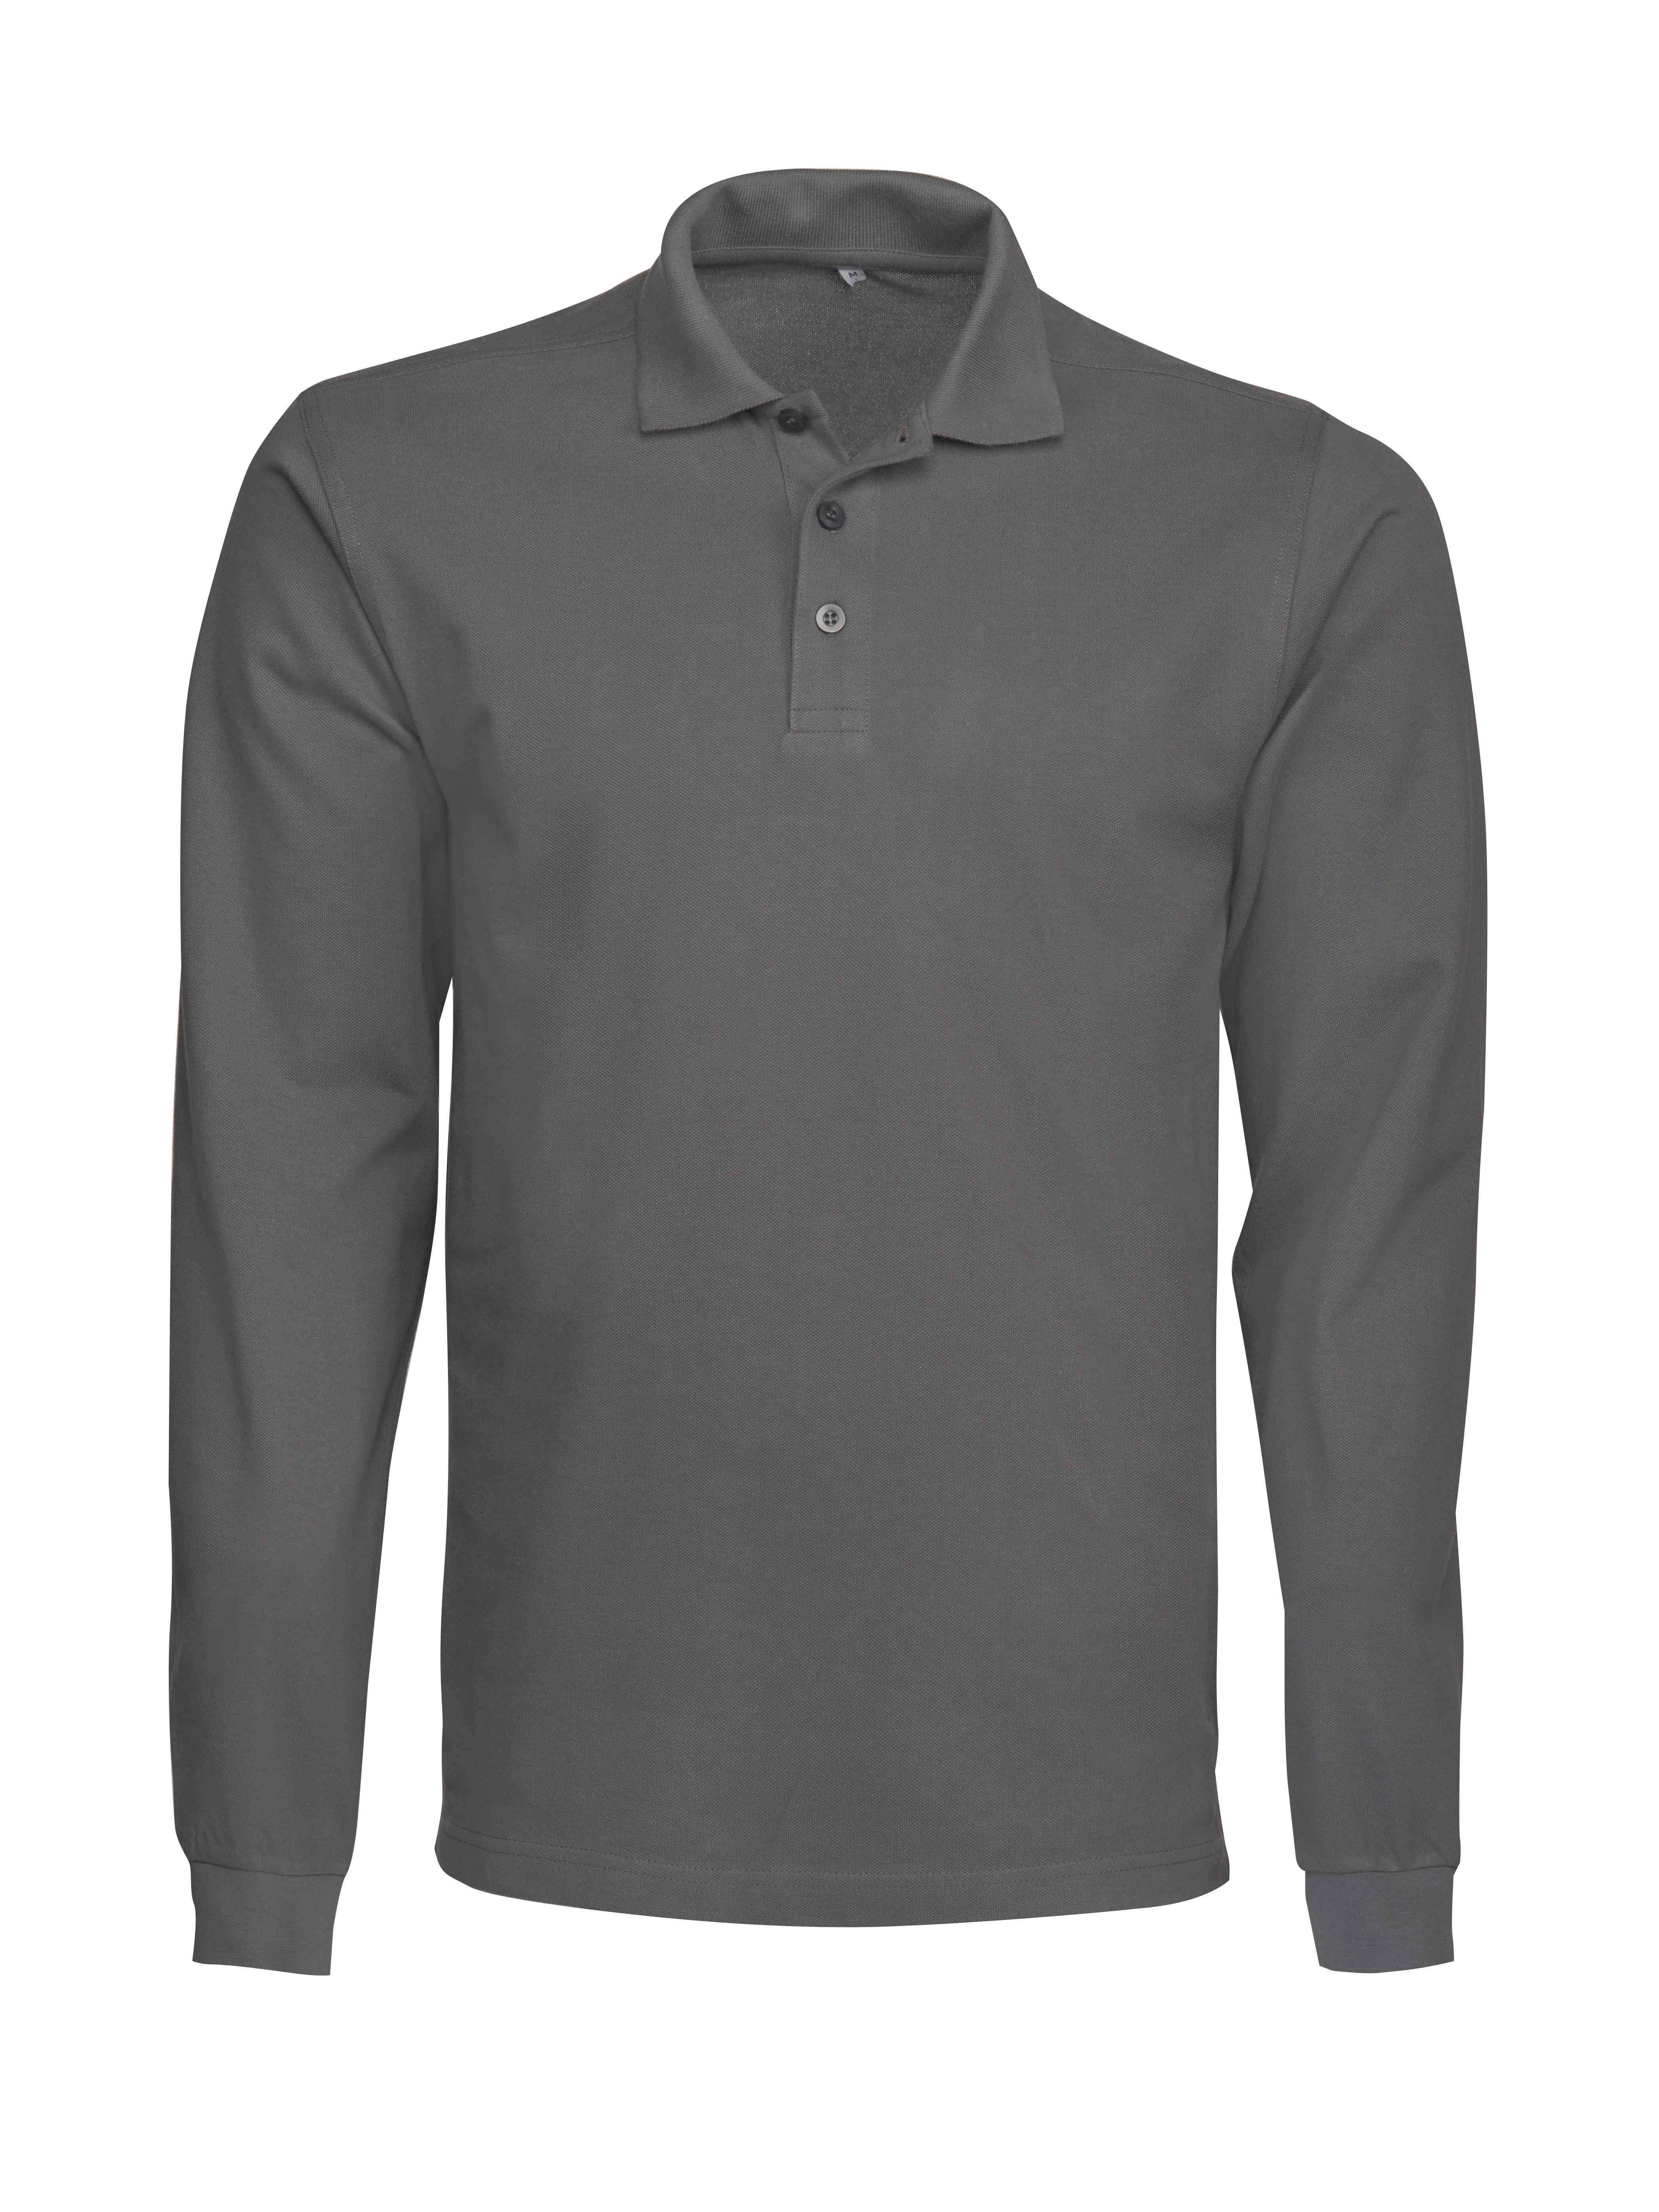 SURF POLO RSX L/S STEEL GREY PE-2265011-935-5